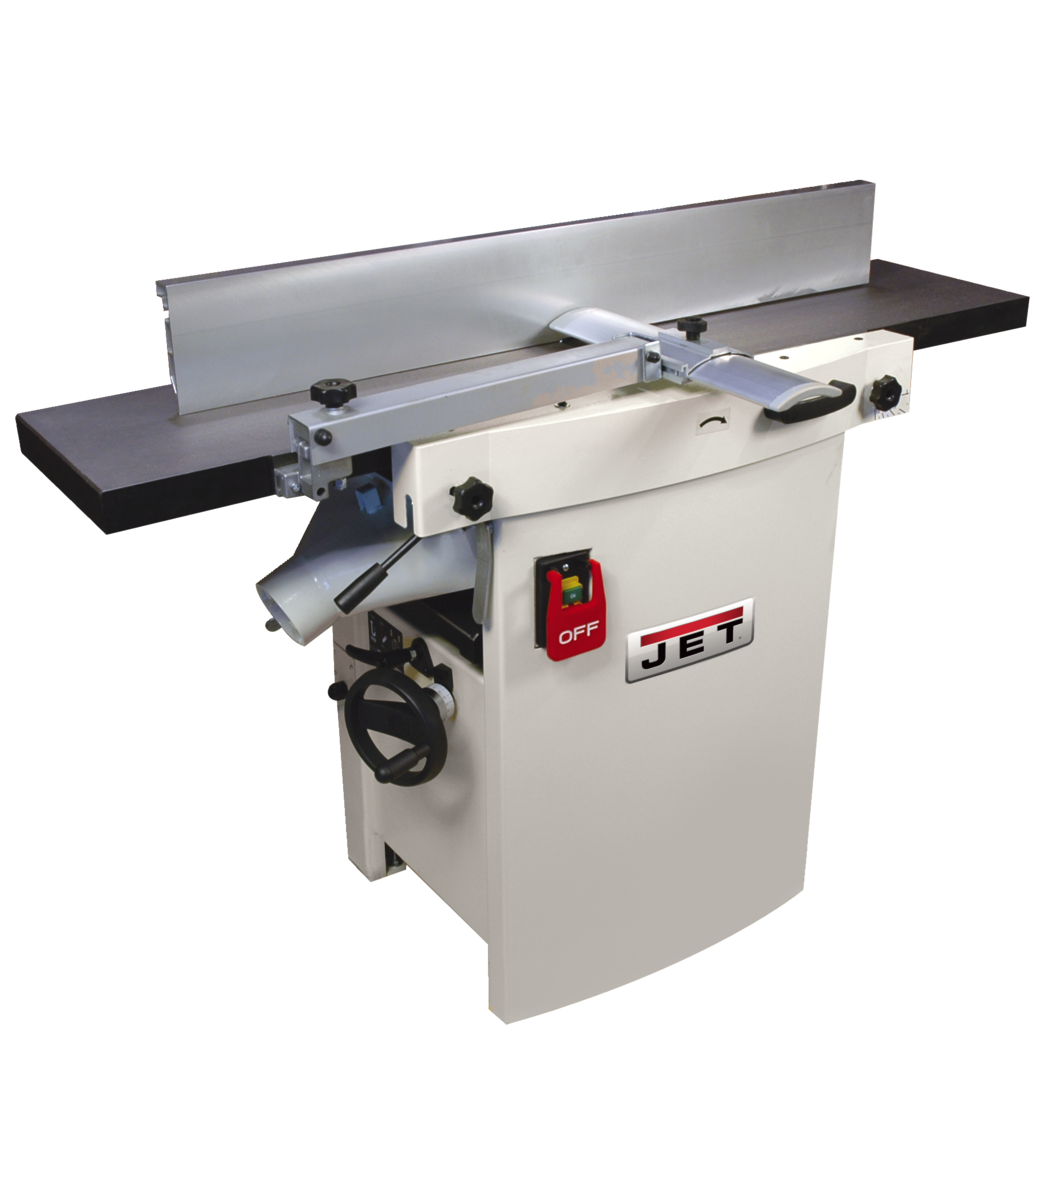 JET JJP-12HH 12" Planer /Jointer with Helical Head - 708476